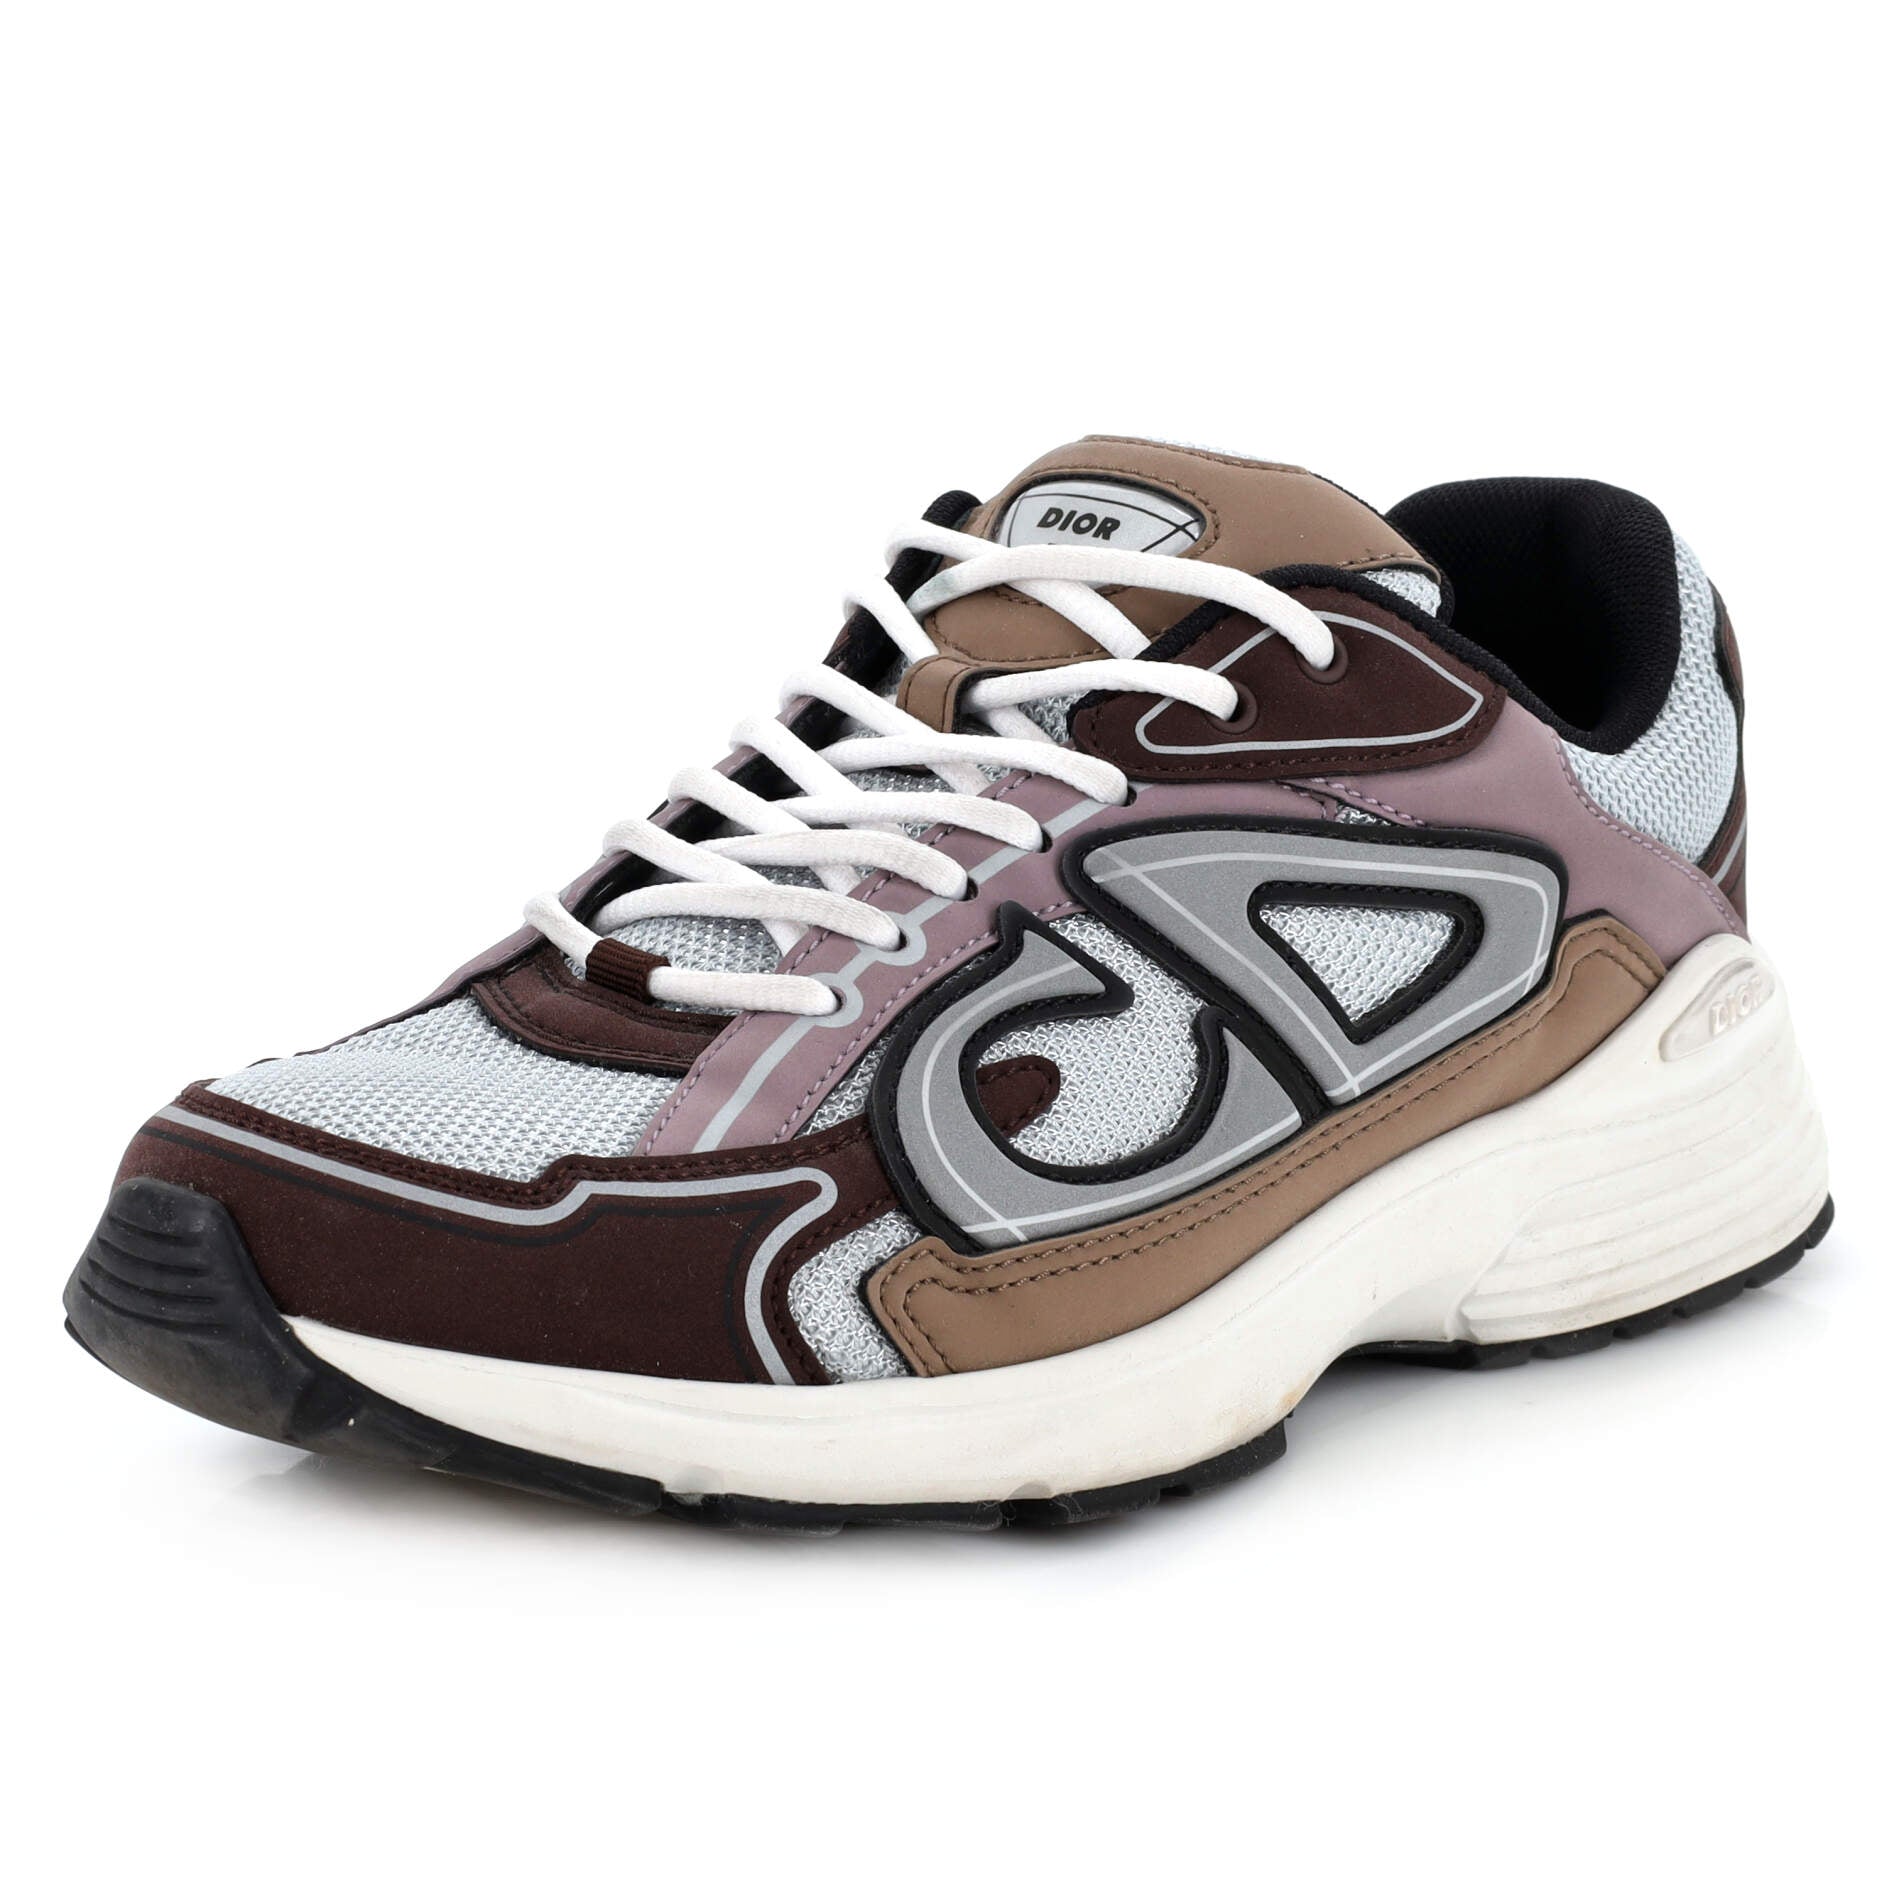 B30 Sneakers Technical Fabric and Leather